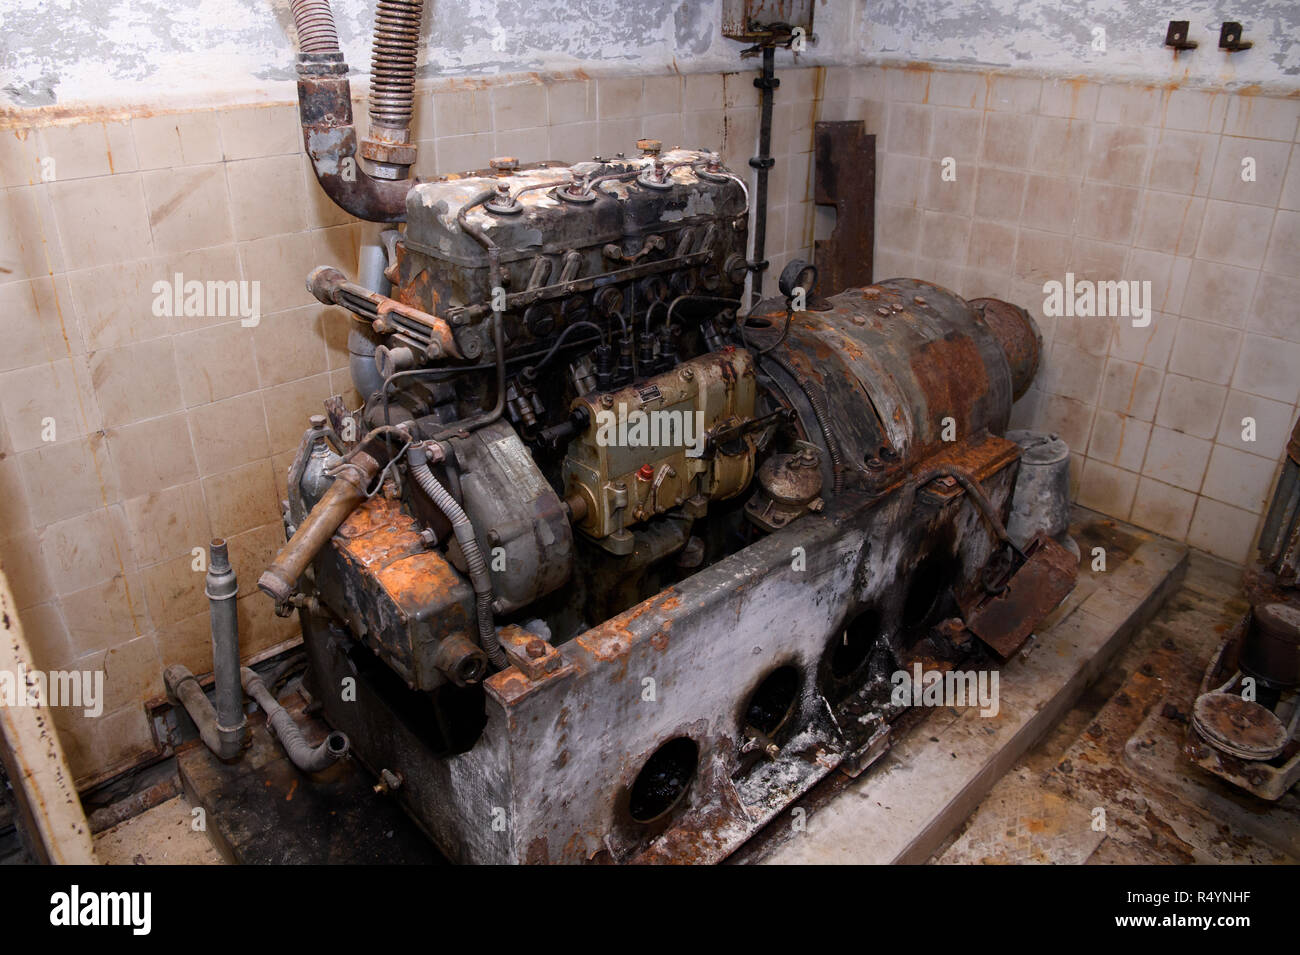 09 November 2018, Bavaria, Pullach: An old diesel generator stands in a bunker under the presidential villa on the premises of the Federal Intelligence Service (BND). The villa was once the residence of Martin Bormann, head of the party office of the NSDAP and a confidant of Hitler, and belonged to the former Reichssiedlung Rudolf Heß which was built between 1936 and 1938. From 1947, the buildings were used by the Gehlen organization and later by the Federal Intelligence Service (BND). The Federal Intelligence Service has moved from Pullach to its new headquarters in the middle of Berlin. It w Stock Photo